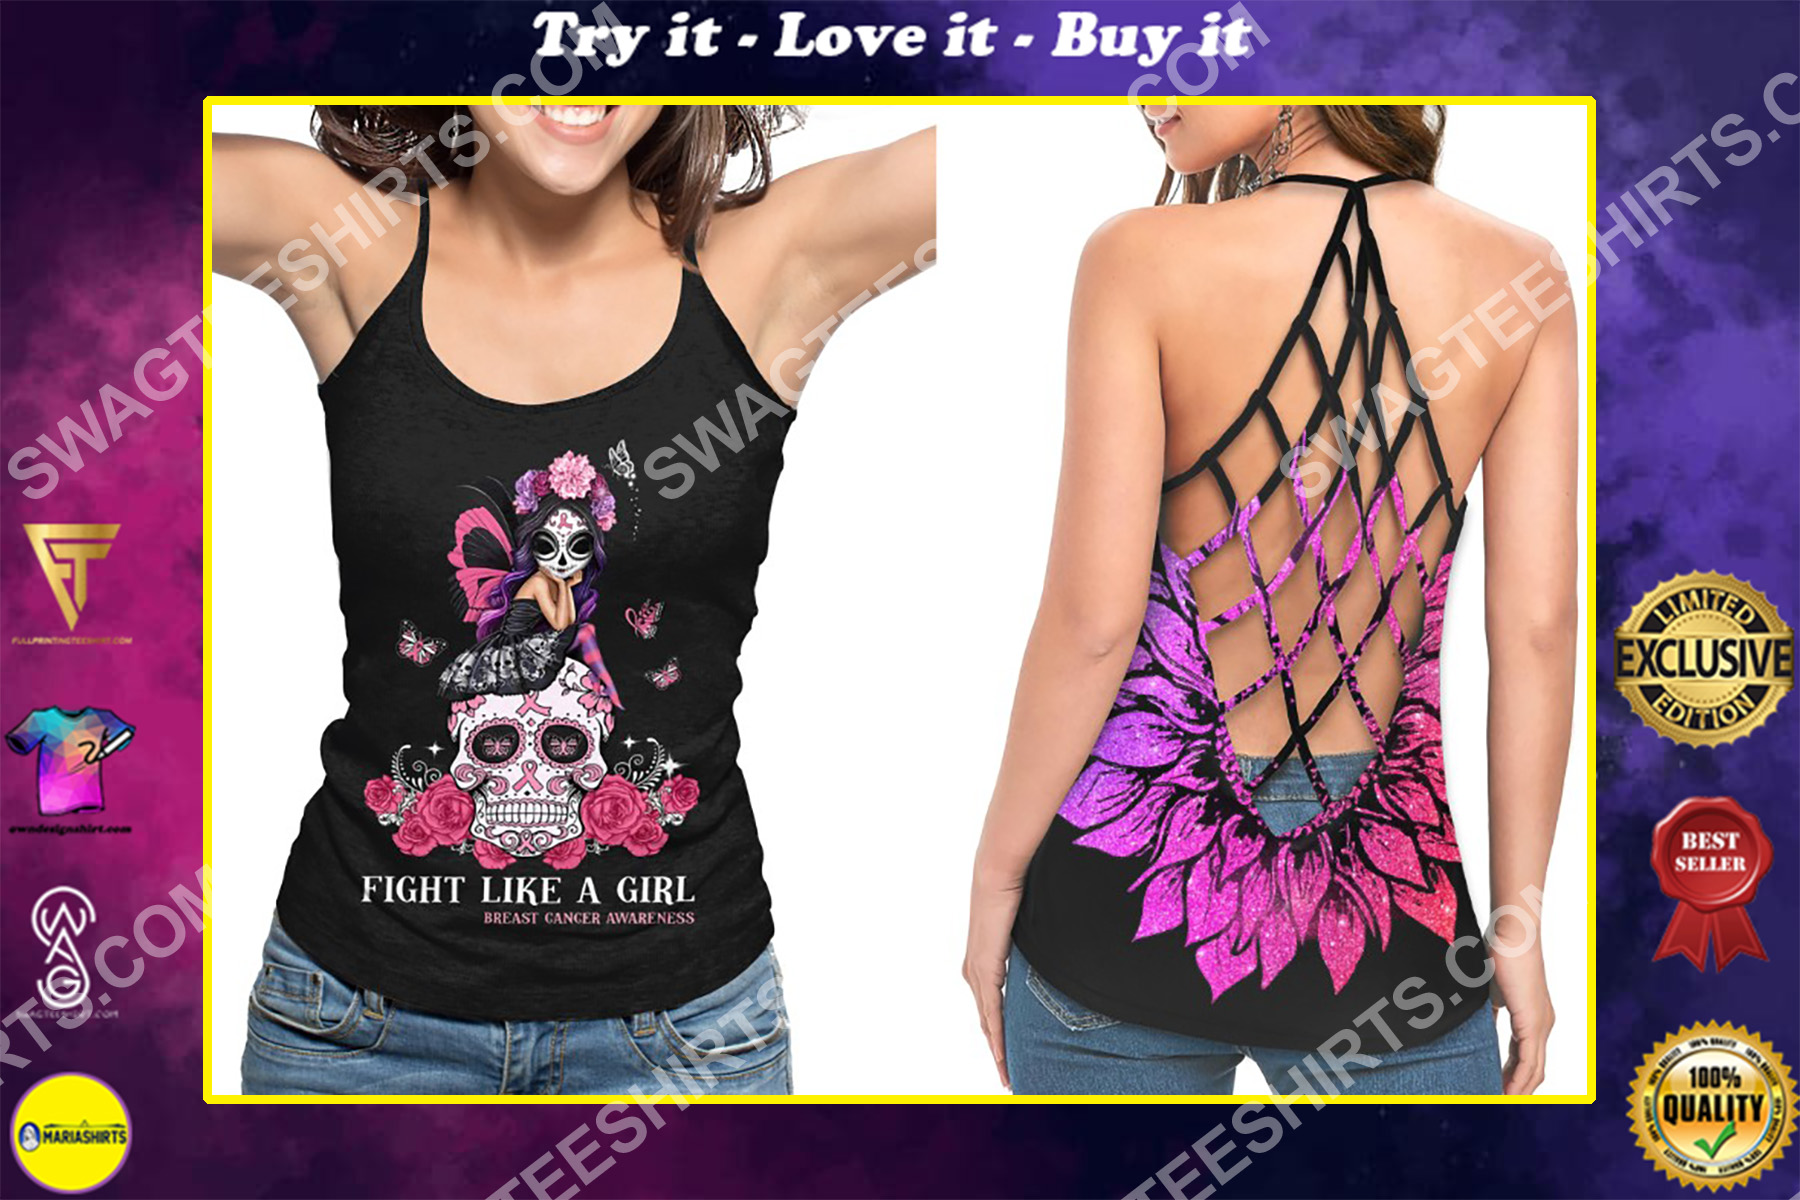 fight like a girl breast cancer awareness strappy back tank top